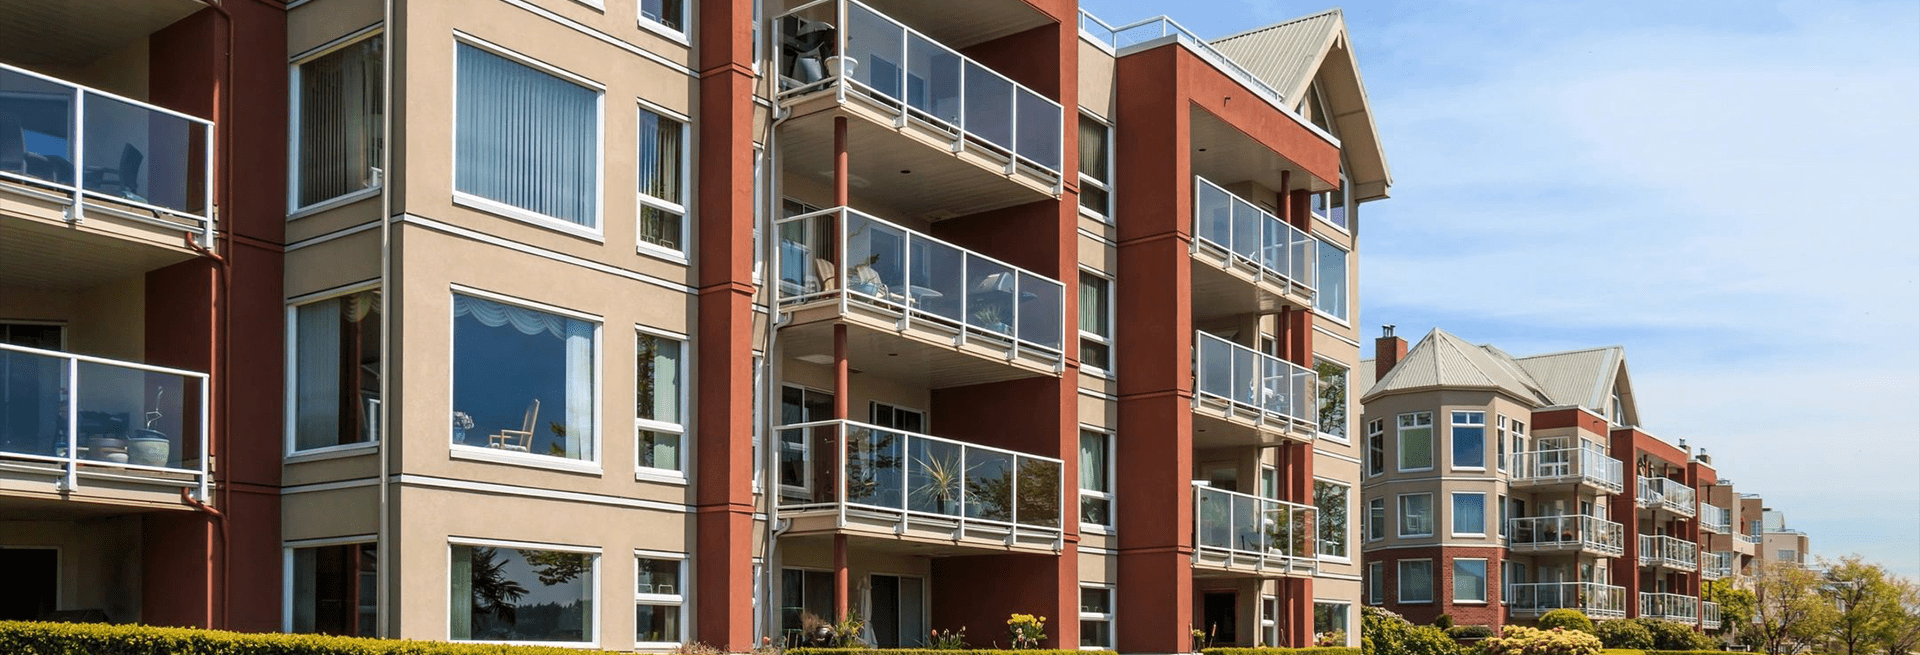 A building with balconies and glass railings.